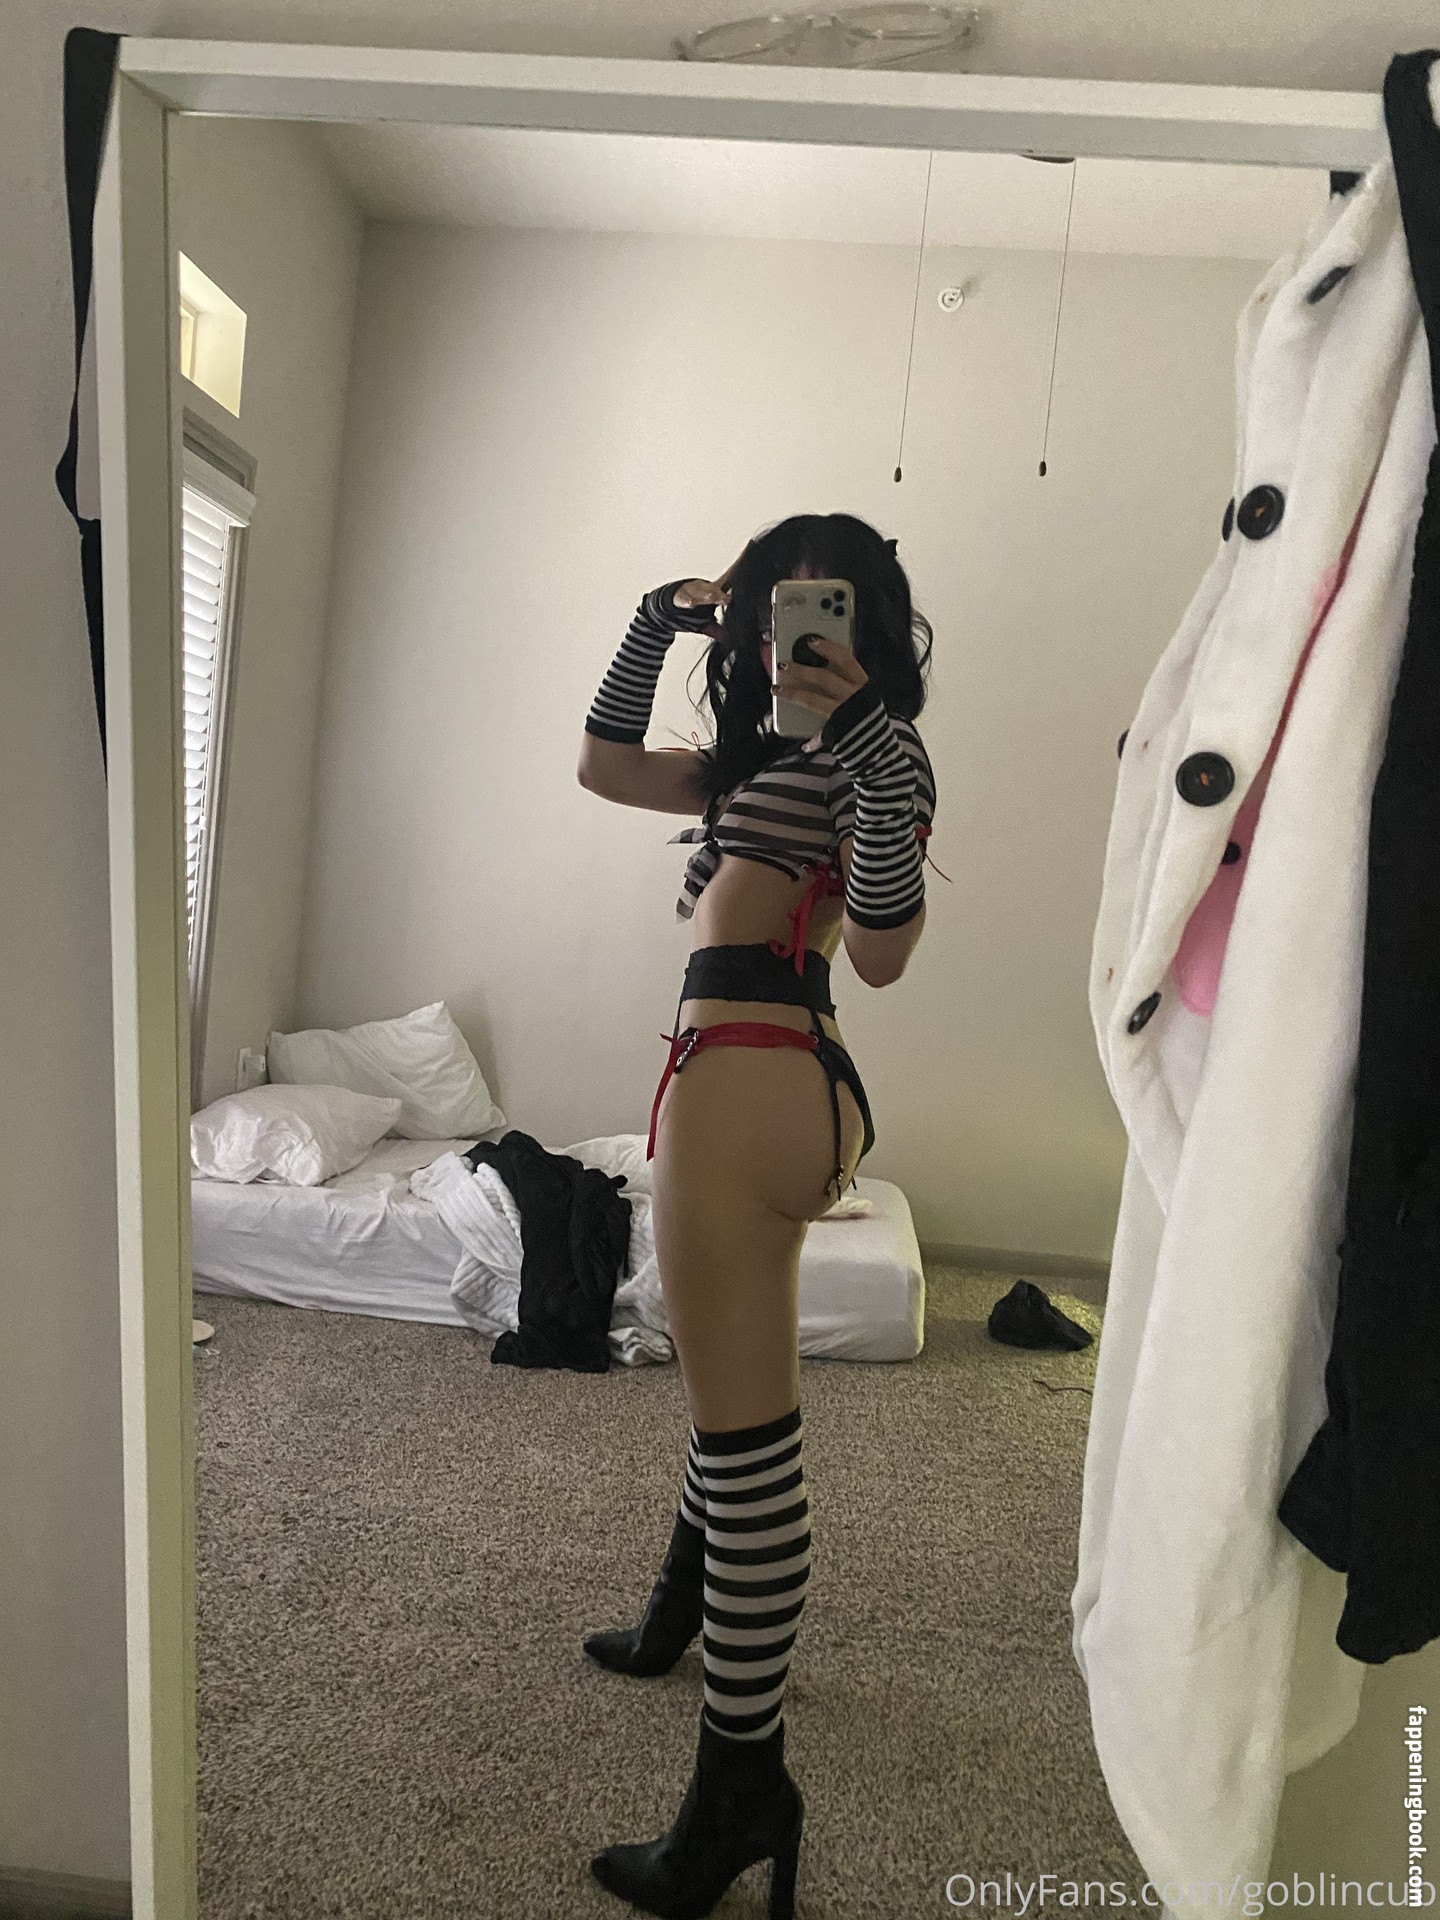 Goblincub / goblincub Nude, OnlyFans Leaks, The Fappening - Photo #1604050....